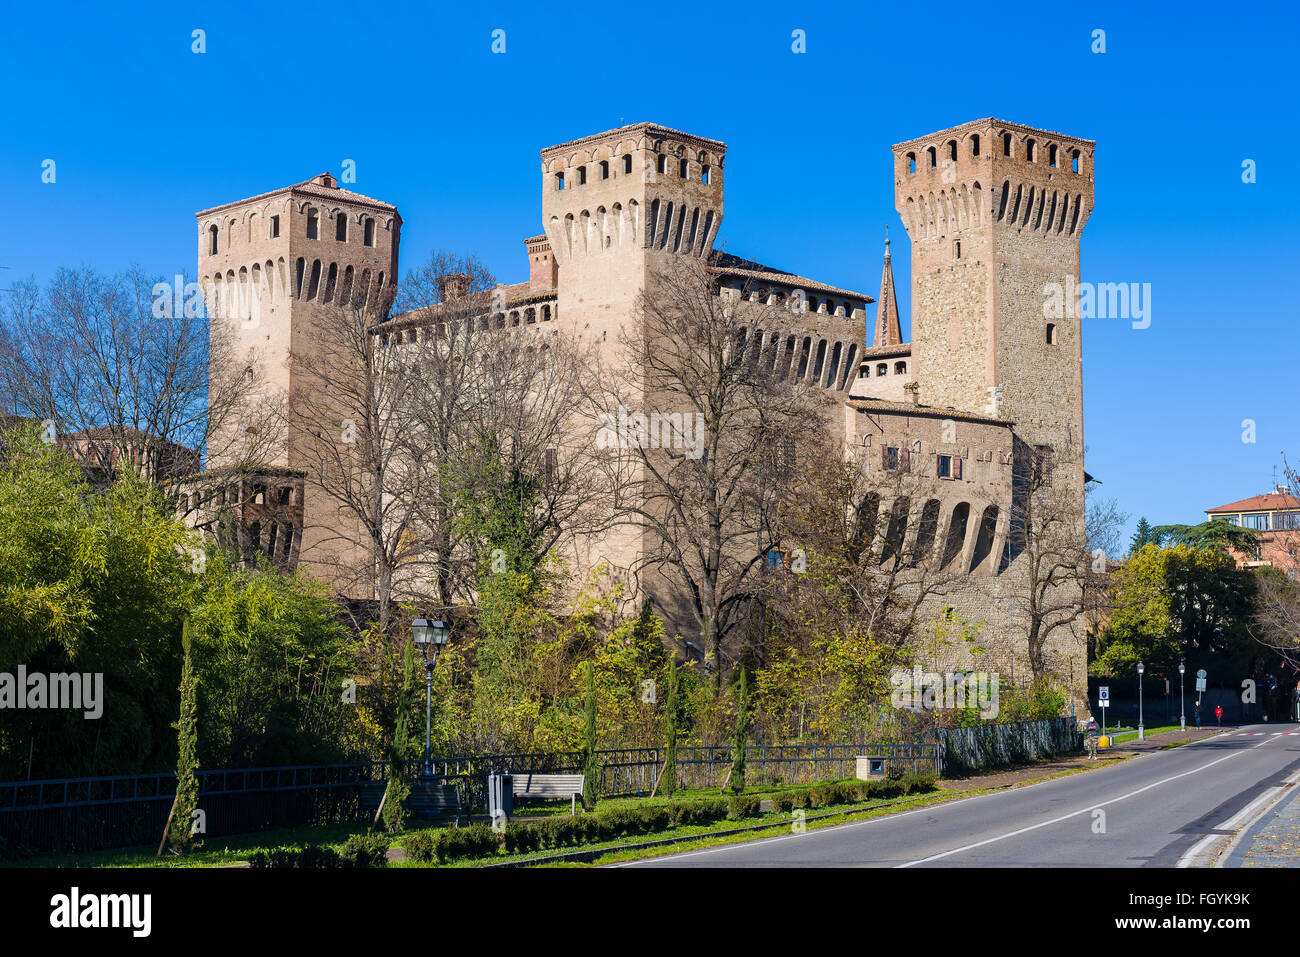 Ancient medieval castle situated in Vignola, near Stock Photo